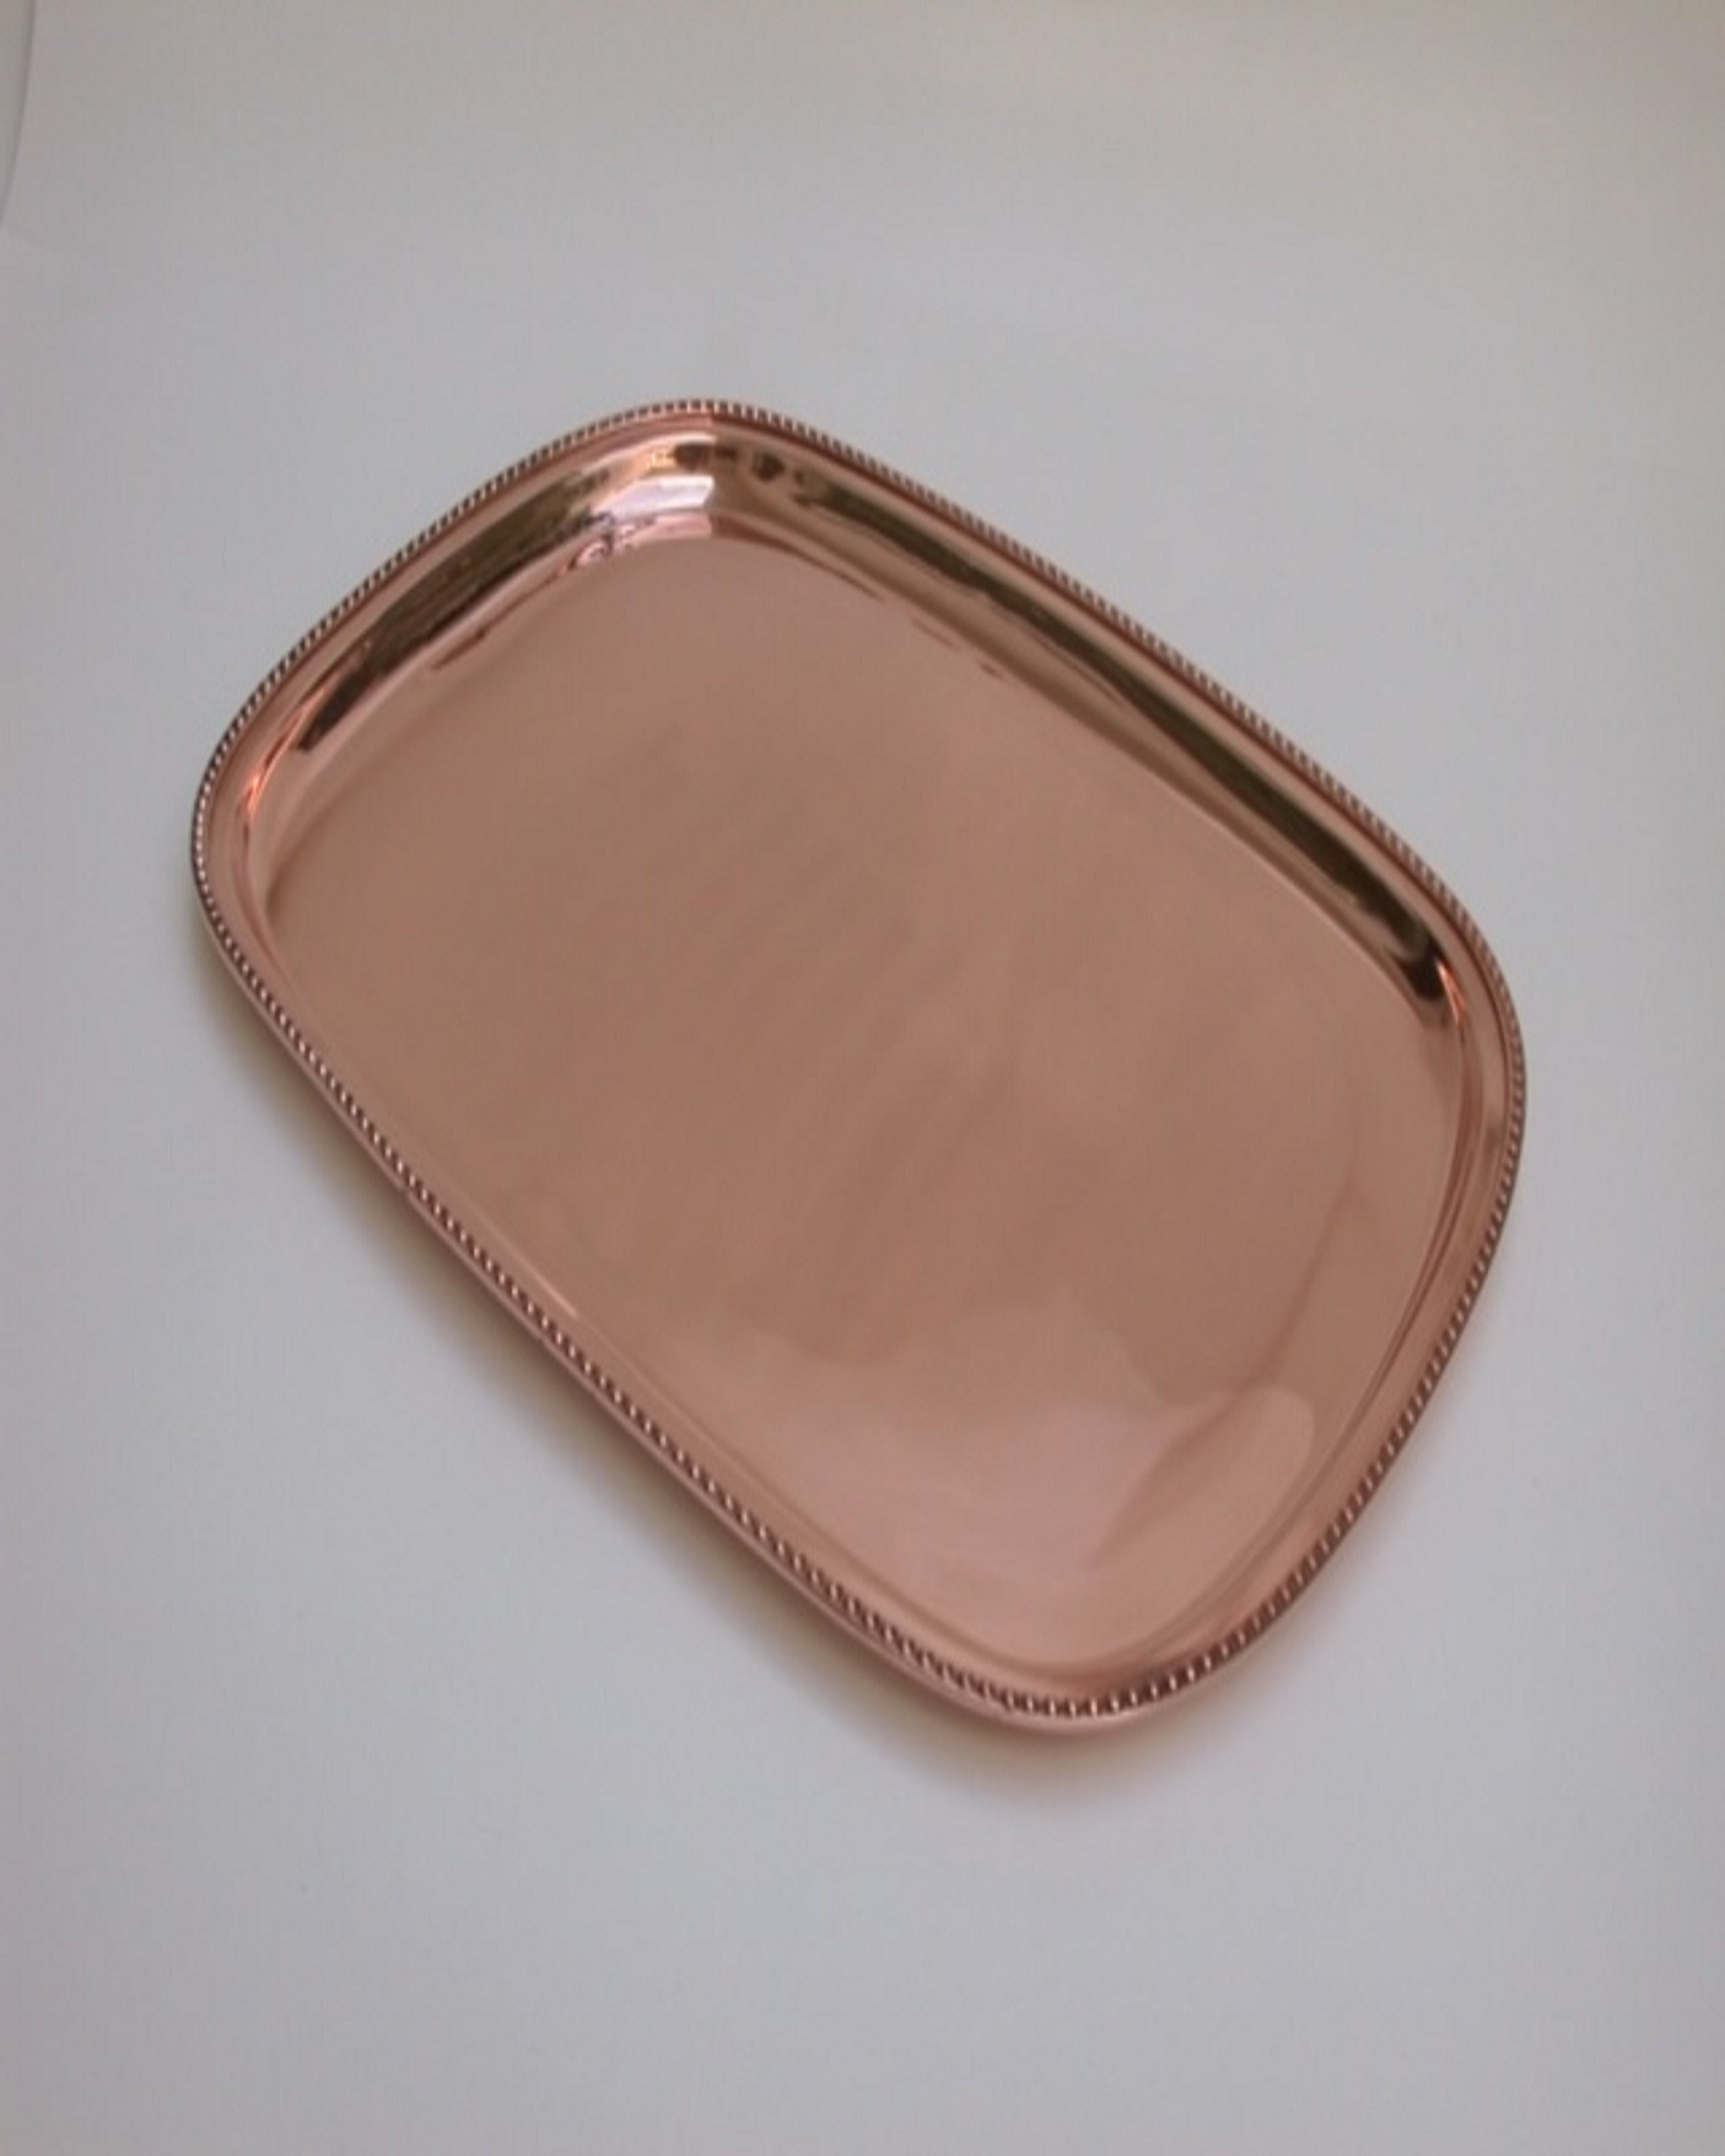 Copper Rose Gold Tray/Plate & Serveware for Kitchen Décor